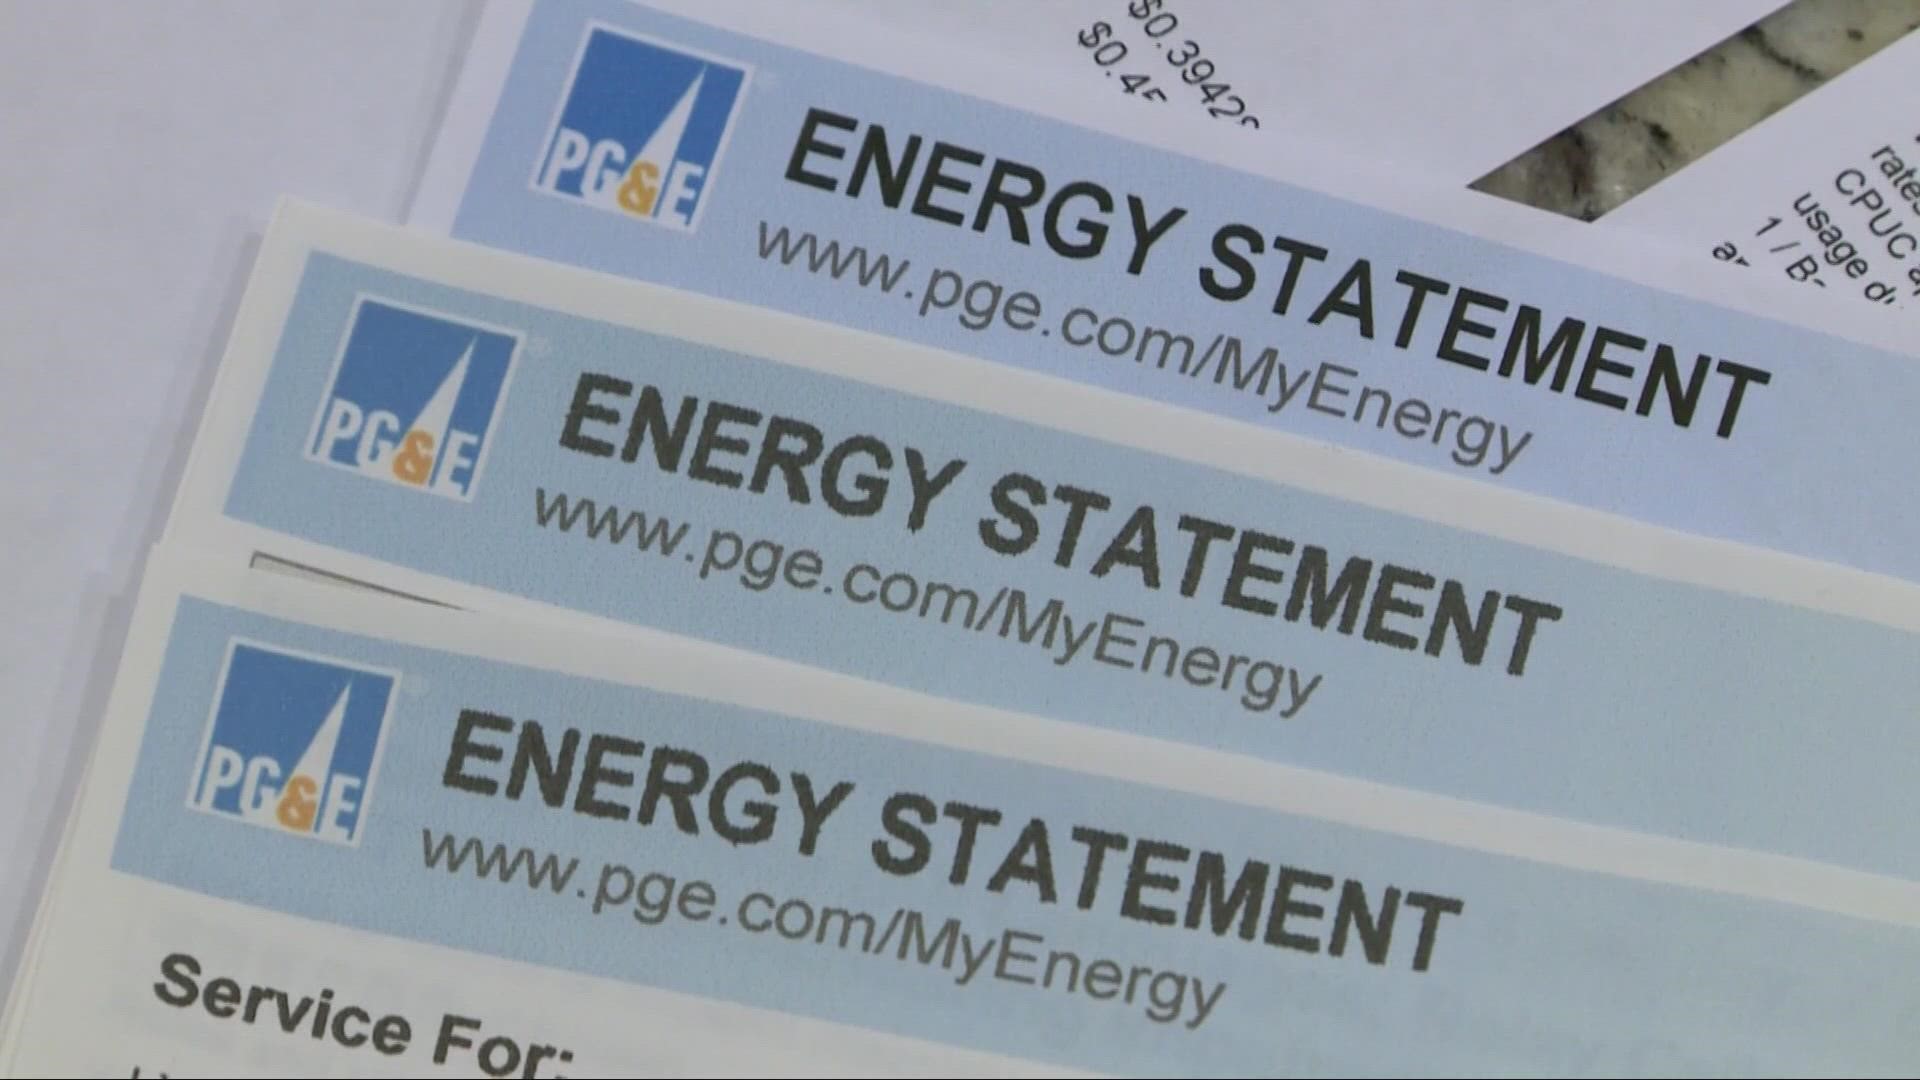 Rep. Josh Harder has called on the company to end its tiered pricing system which raises electric costs by 20% or more after a customer exceeds average use.